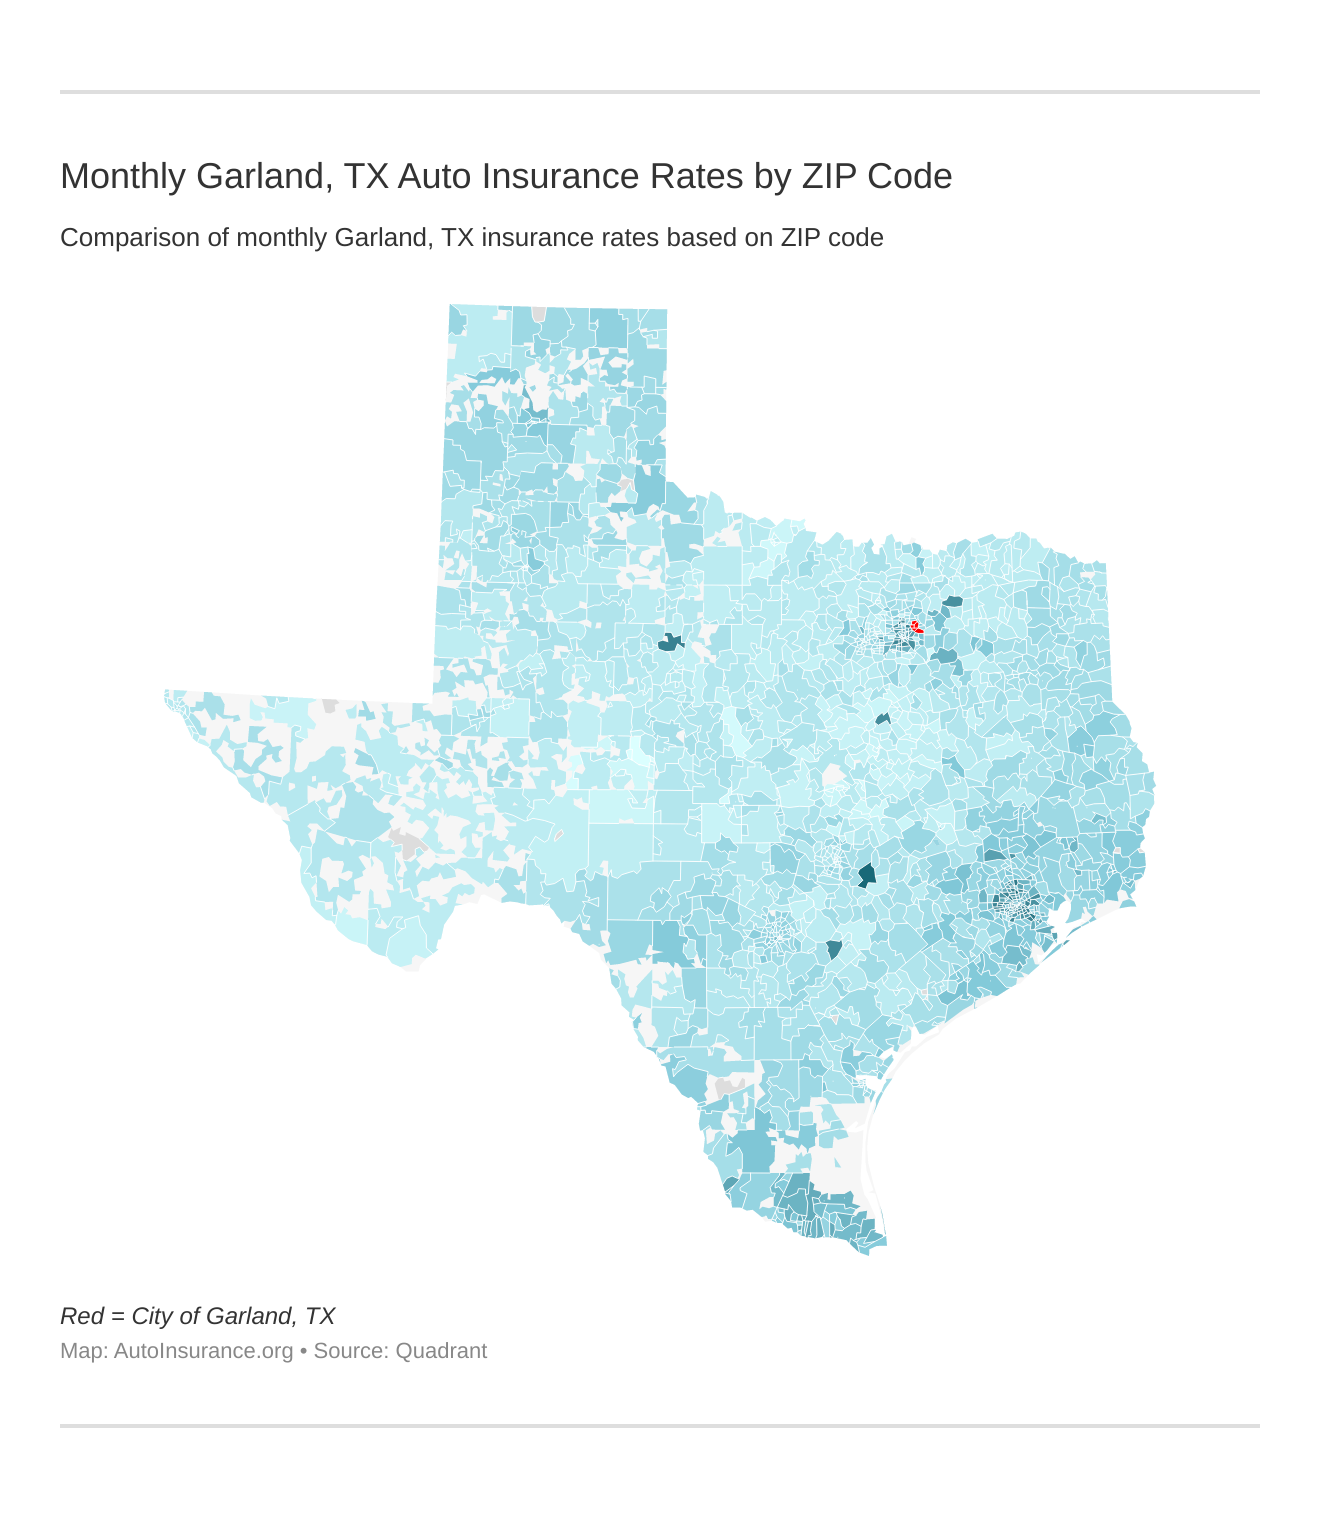 Monthly Garland, TX Auto Insurance Rates by ZIP Code